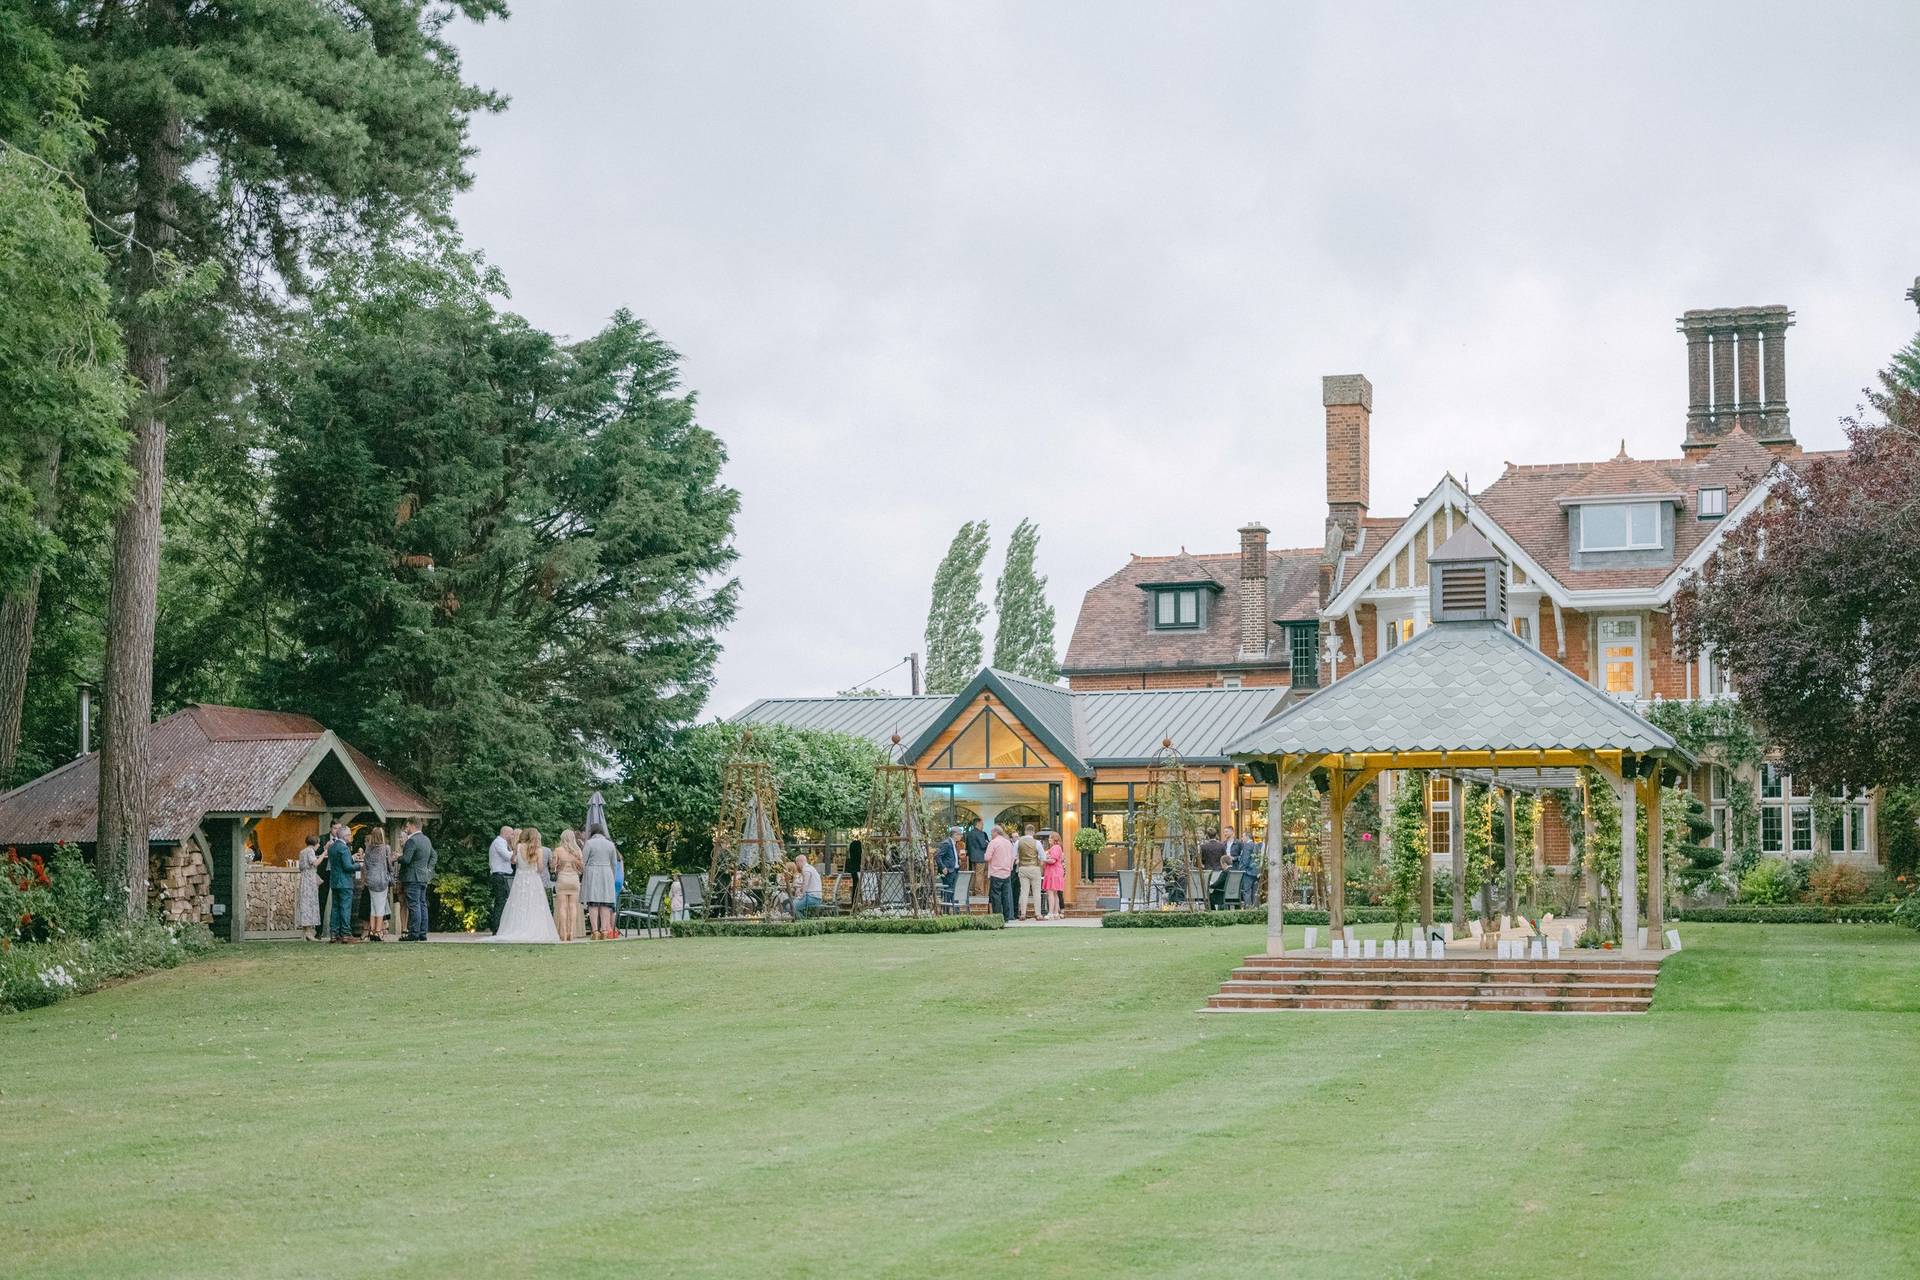 Baddow Park House Wedding Venue Chelmsford, Essex | hitched.co.uk